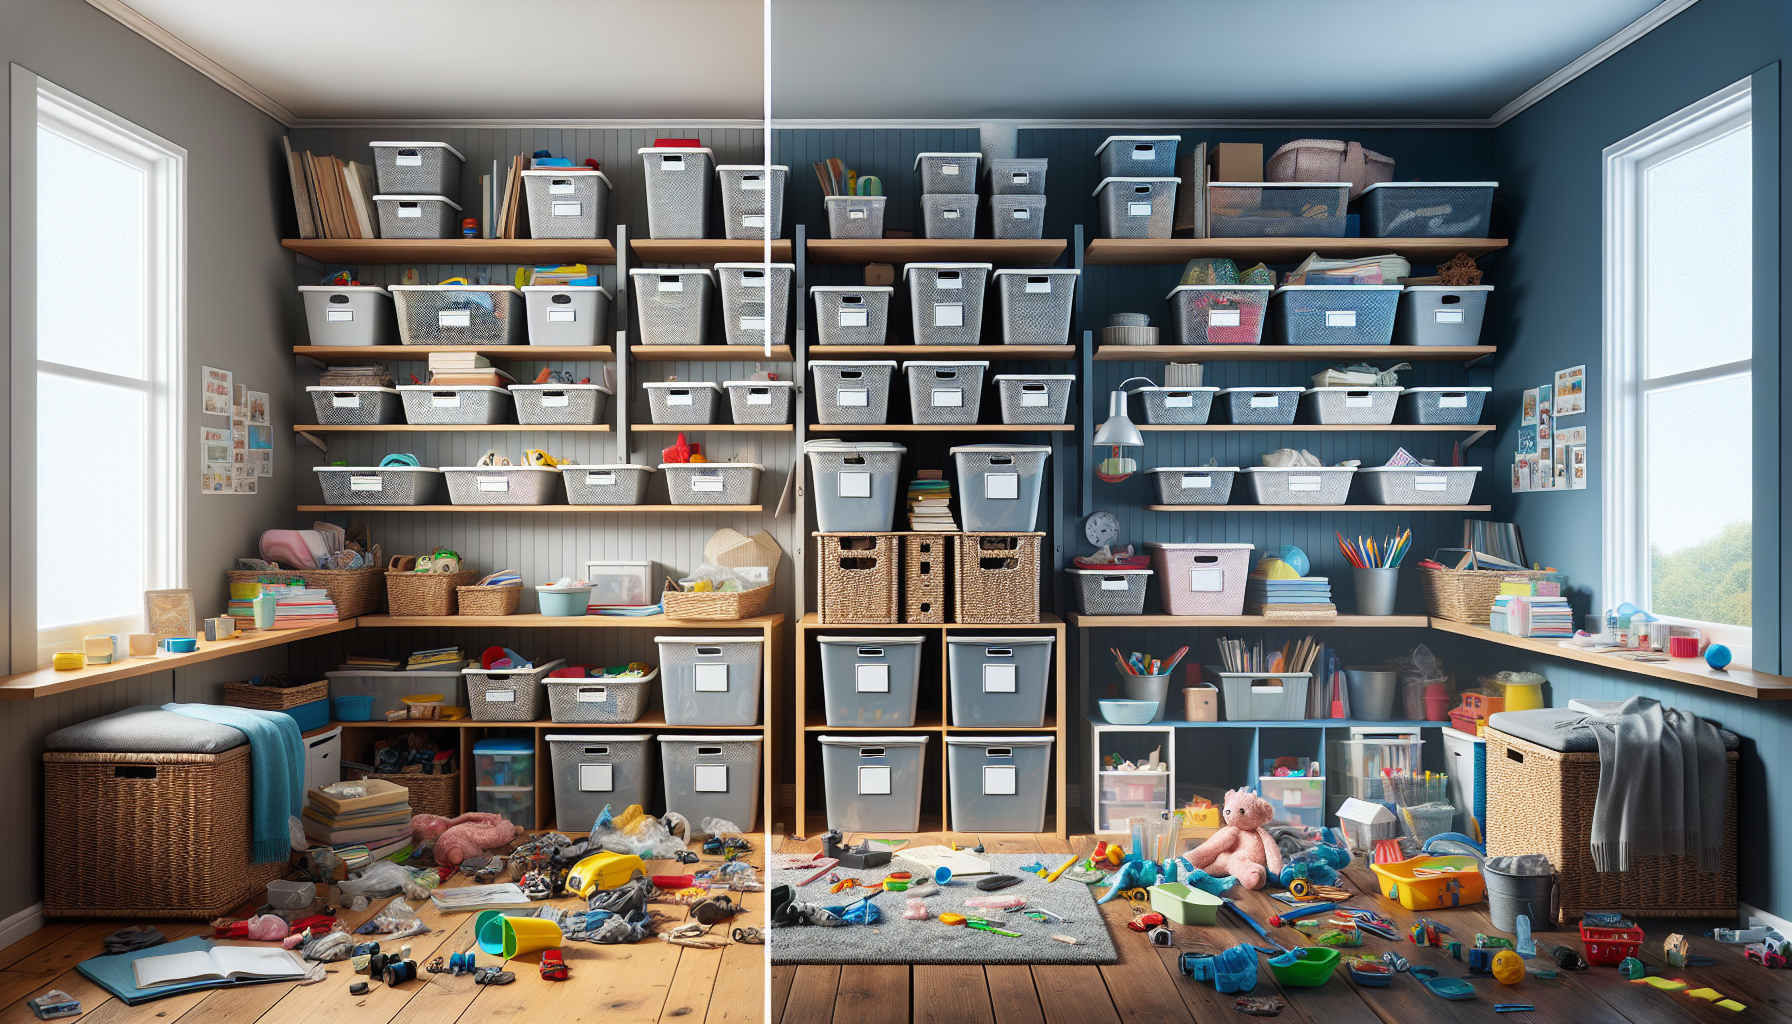 Become a clutter control expert with the revolutionary container concept method